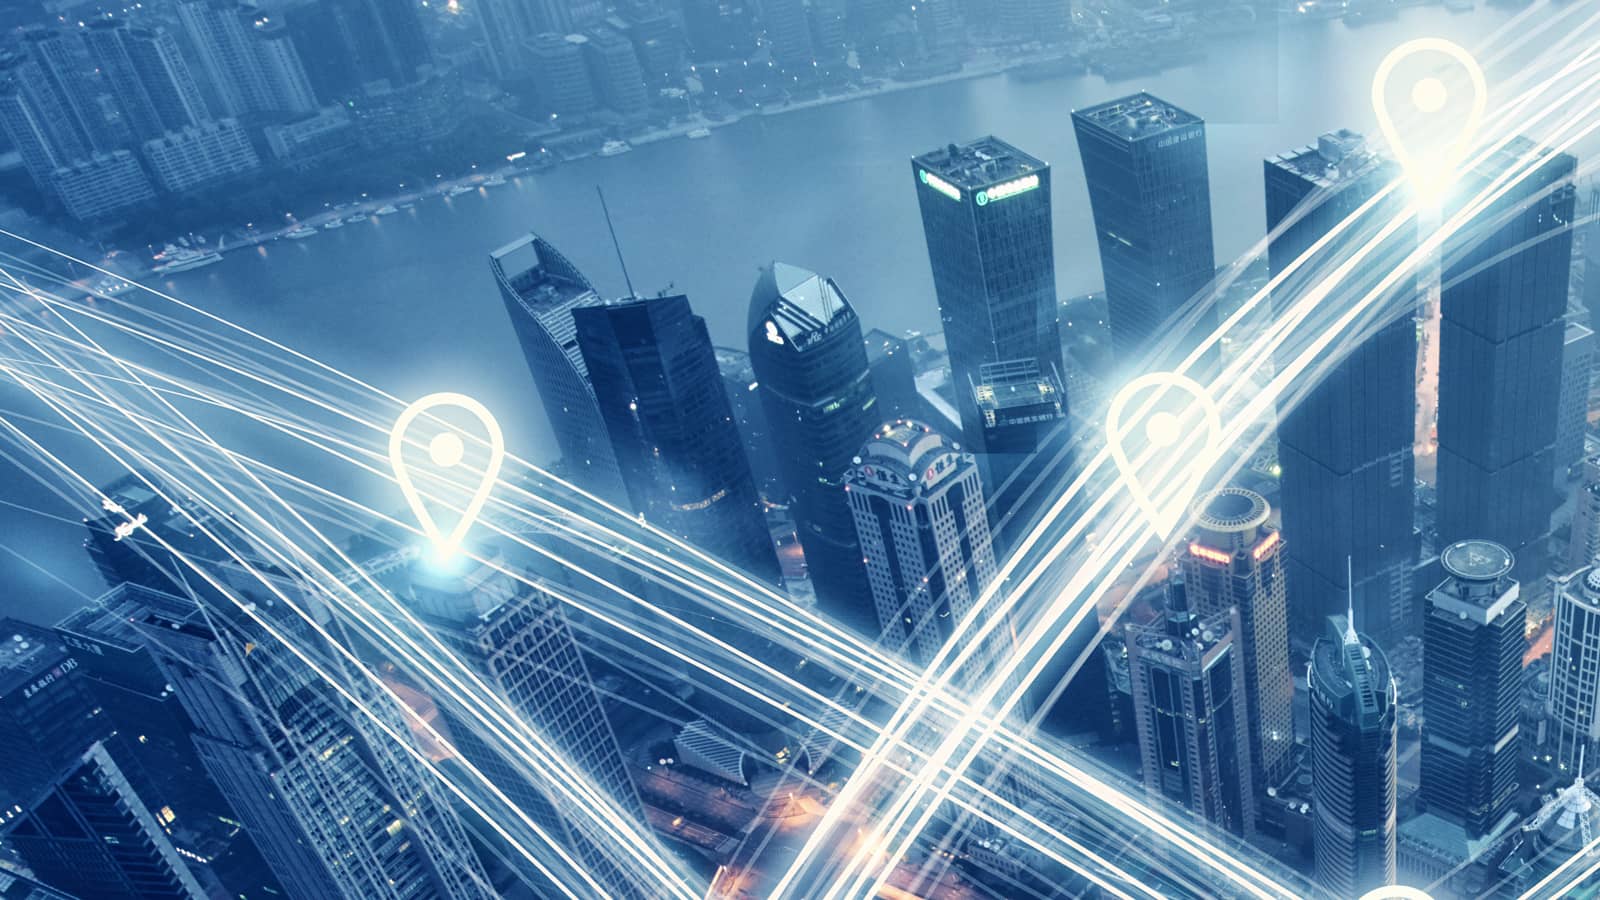 Stock image of city with drawn invisible internet connections